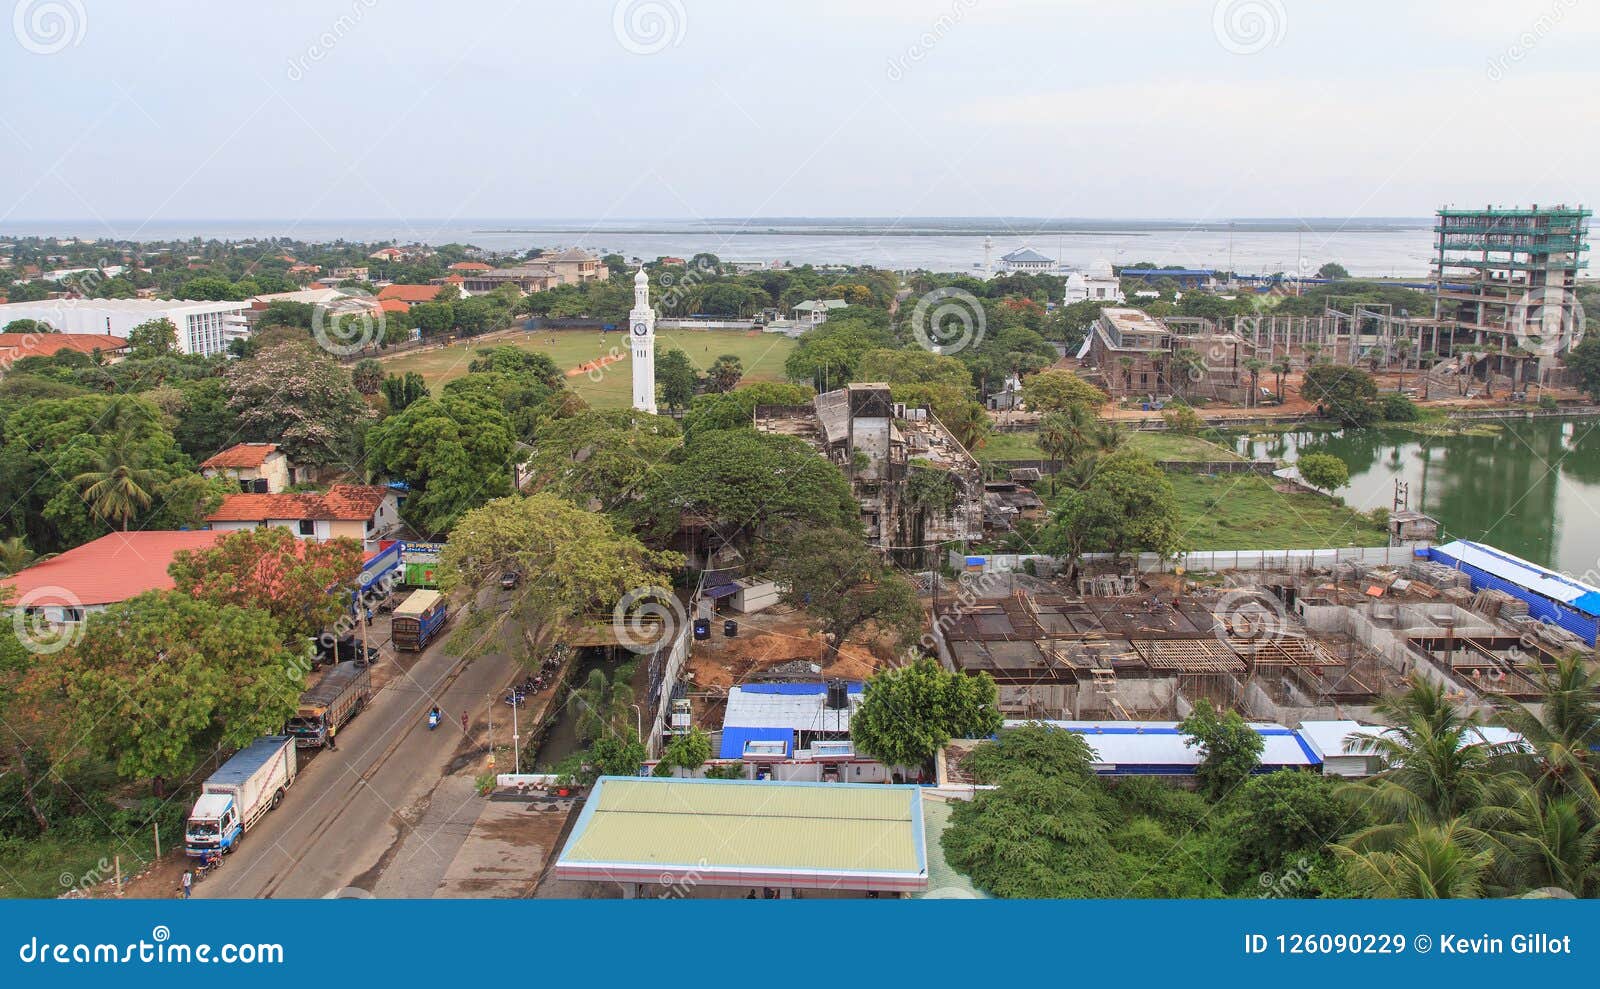 Aerial View Of The City Of Jaffna Sri Lanka Editorial Stock Image